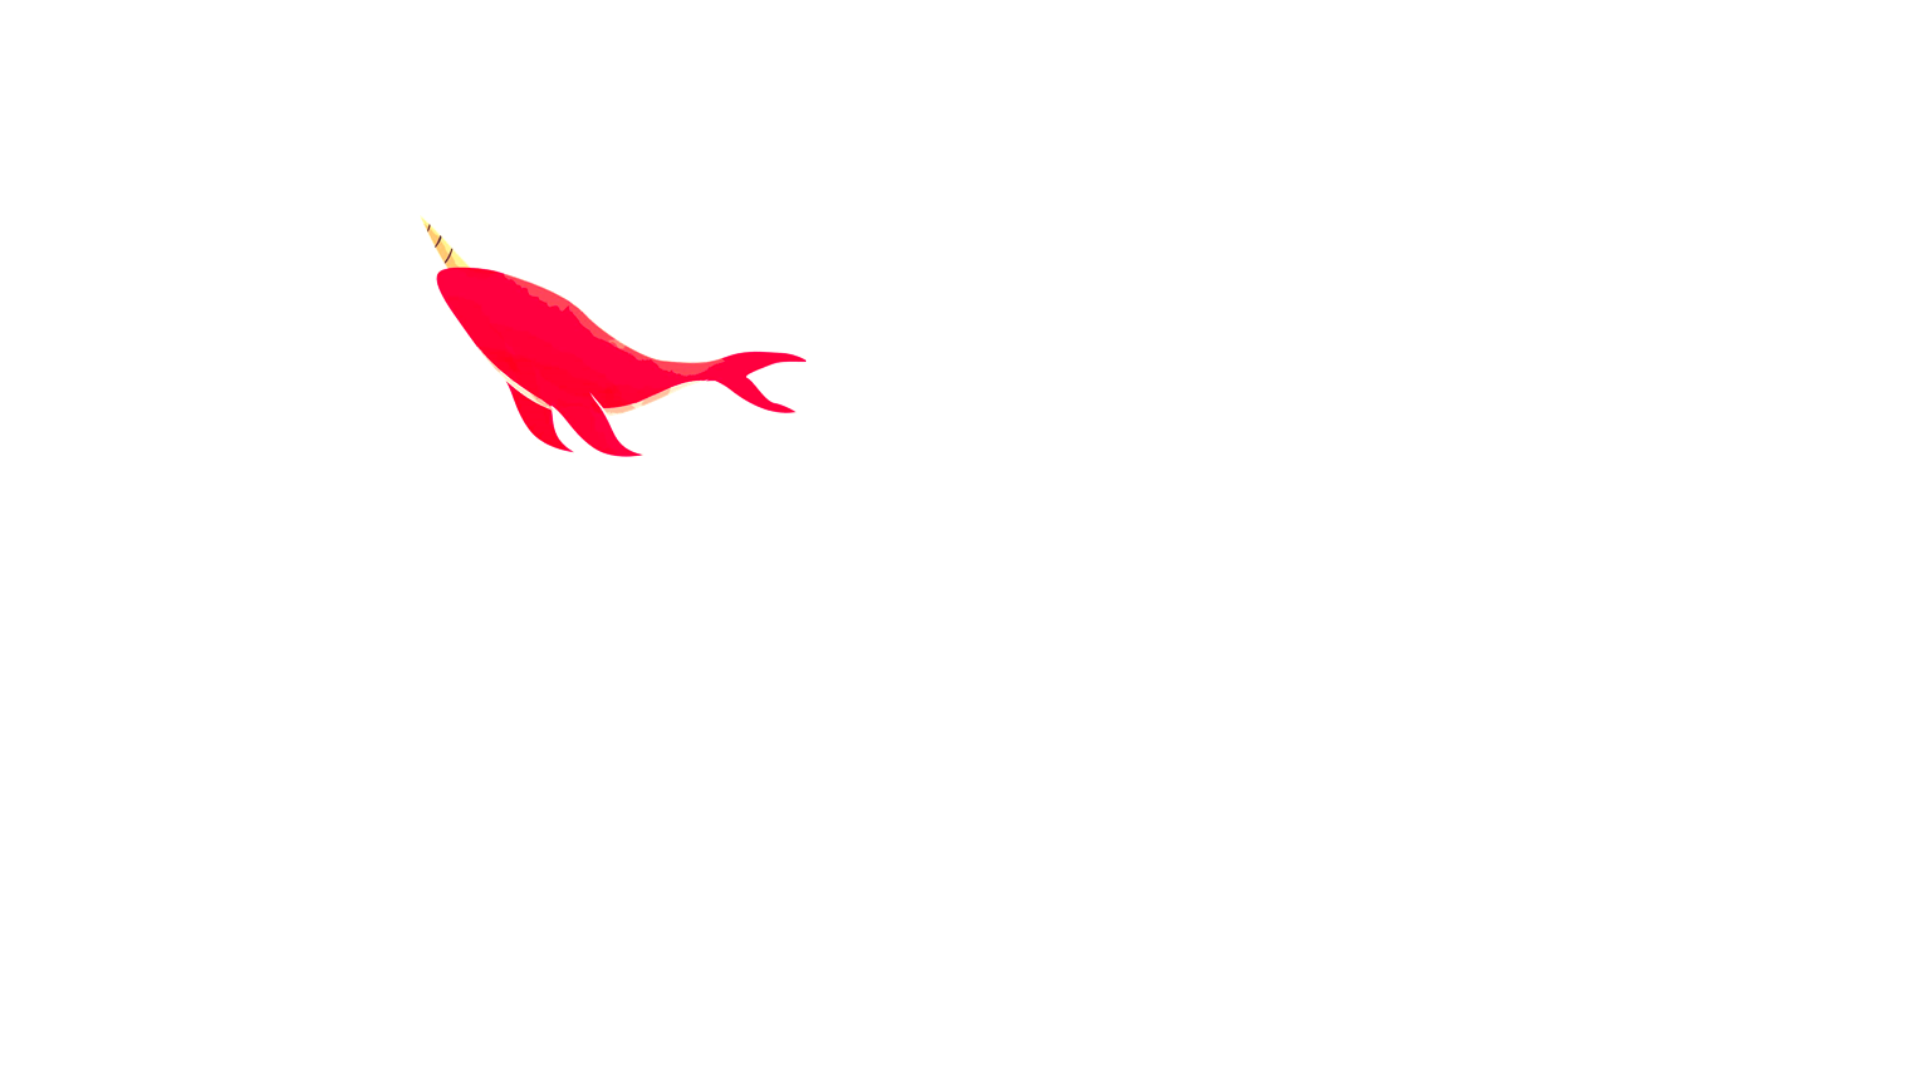 Rocdesk-Modernize your business, Export your products to the world, at low cost and risk.Unify marketing, sales, service, commerce,on one platform.